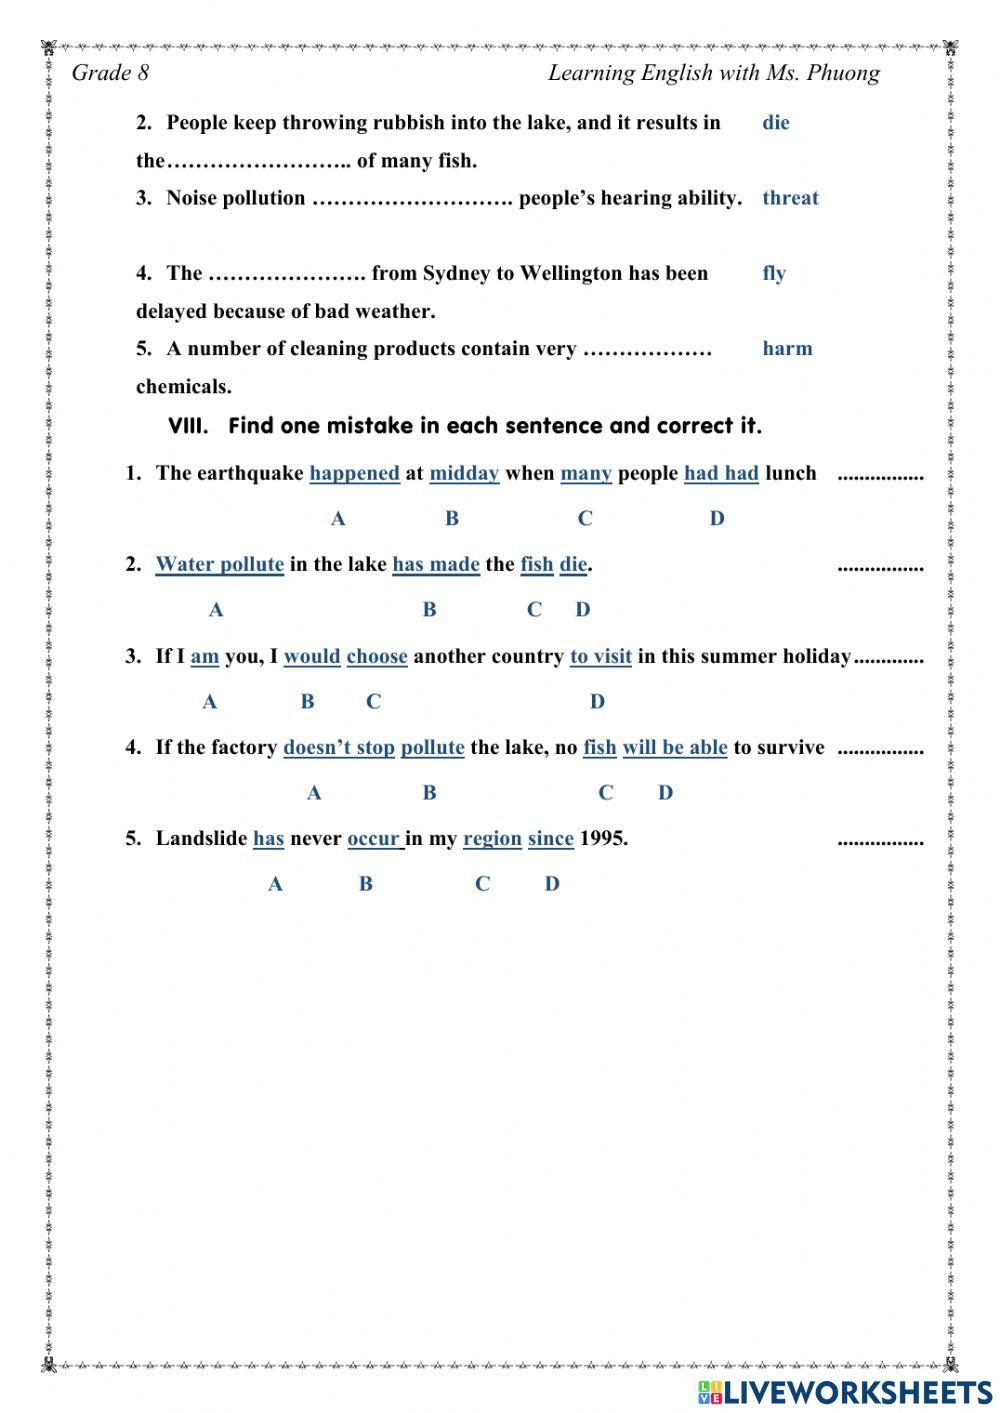 English 8 - Mid -2nd term test